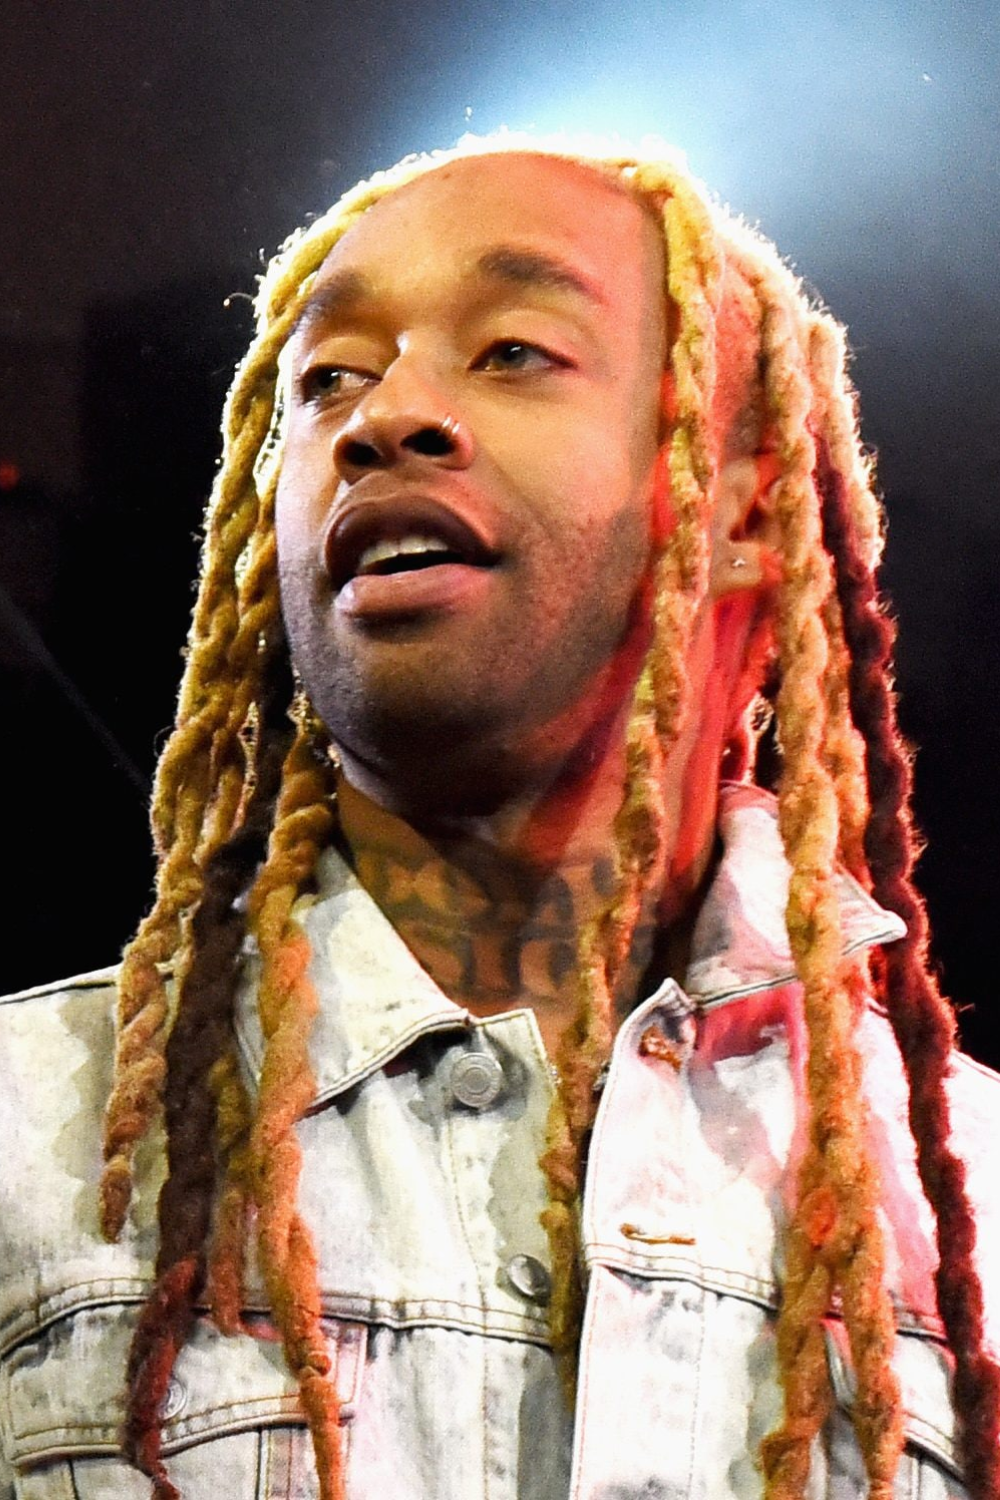 Ty Dolla Sign dreads in blonde